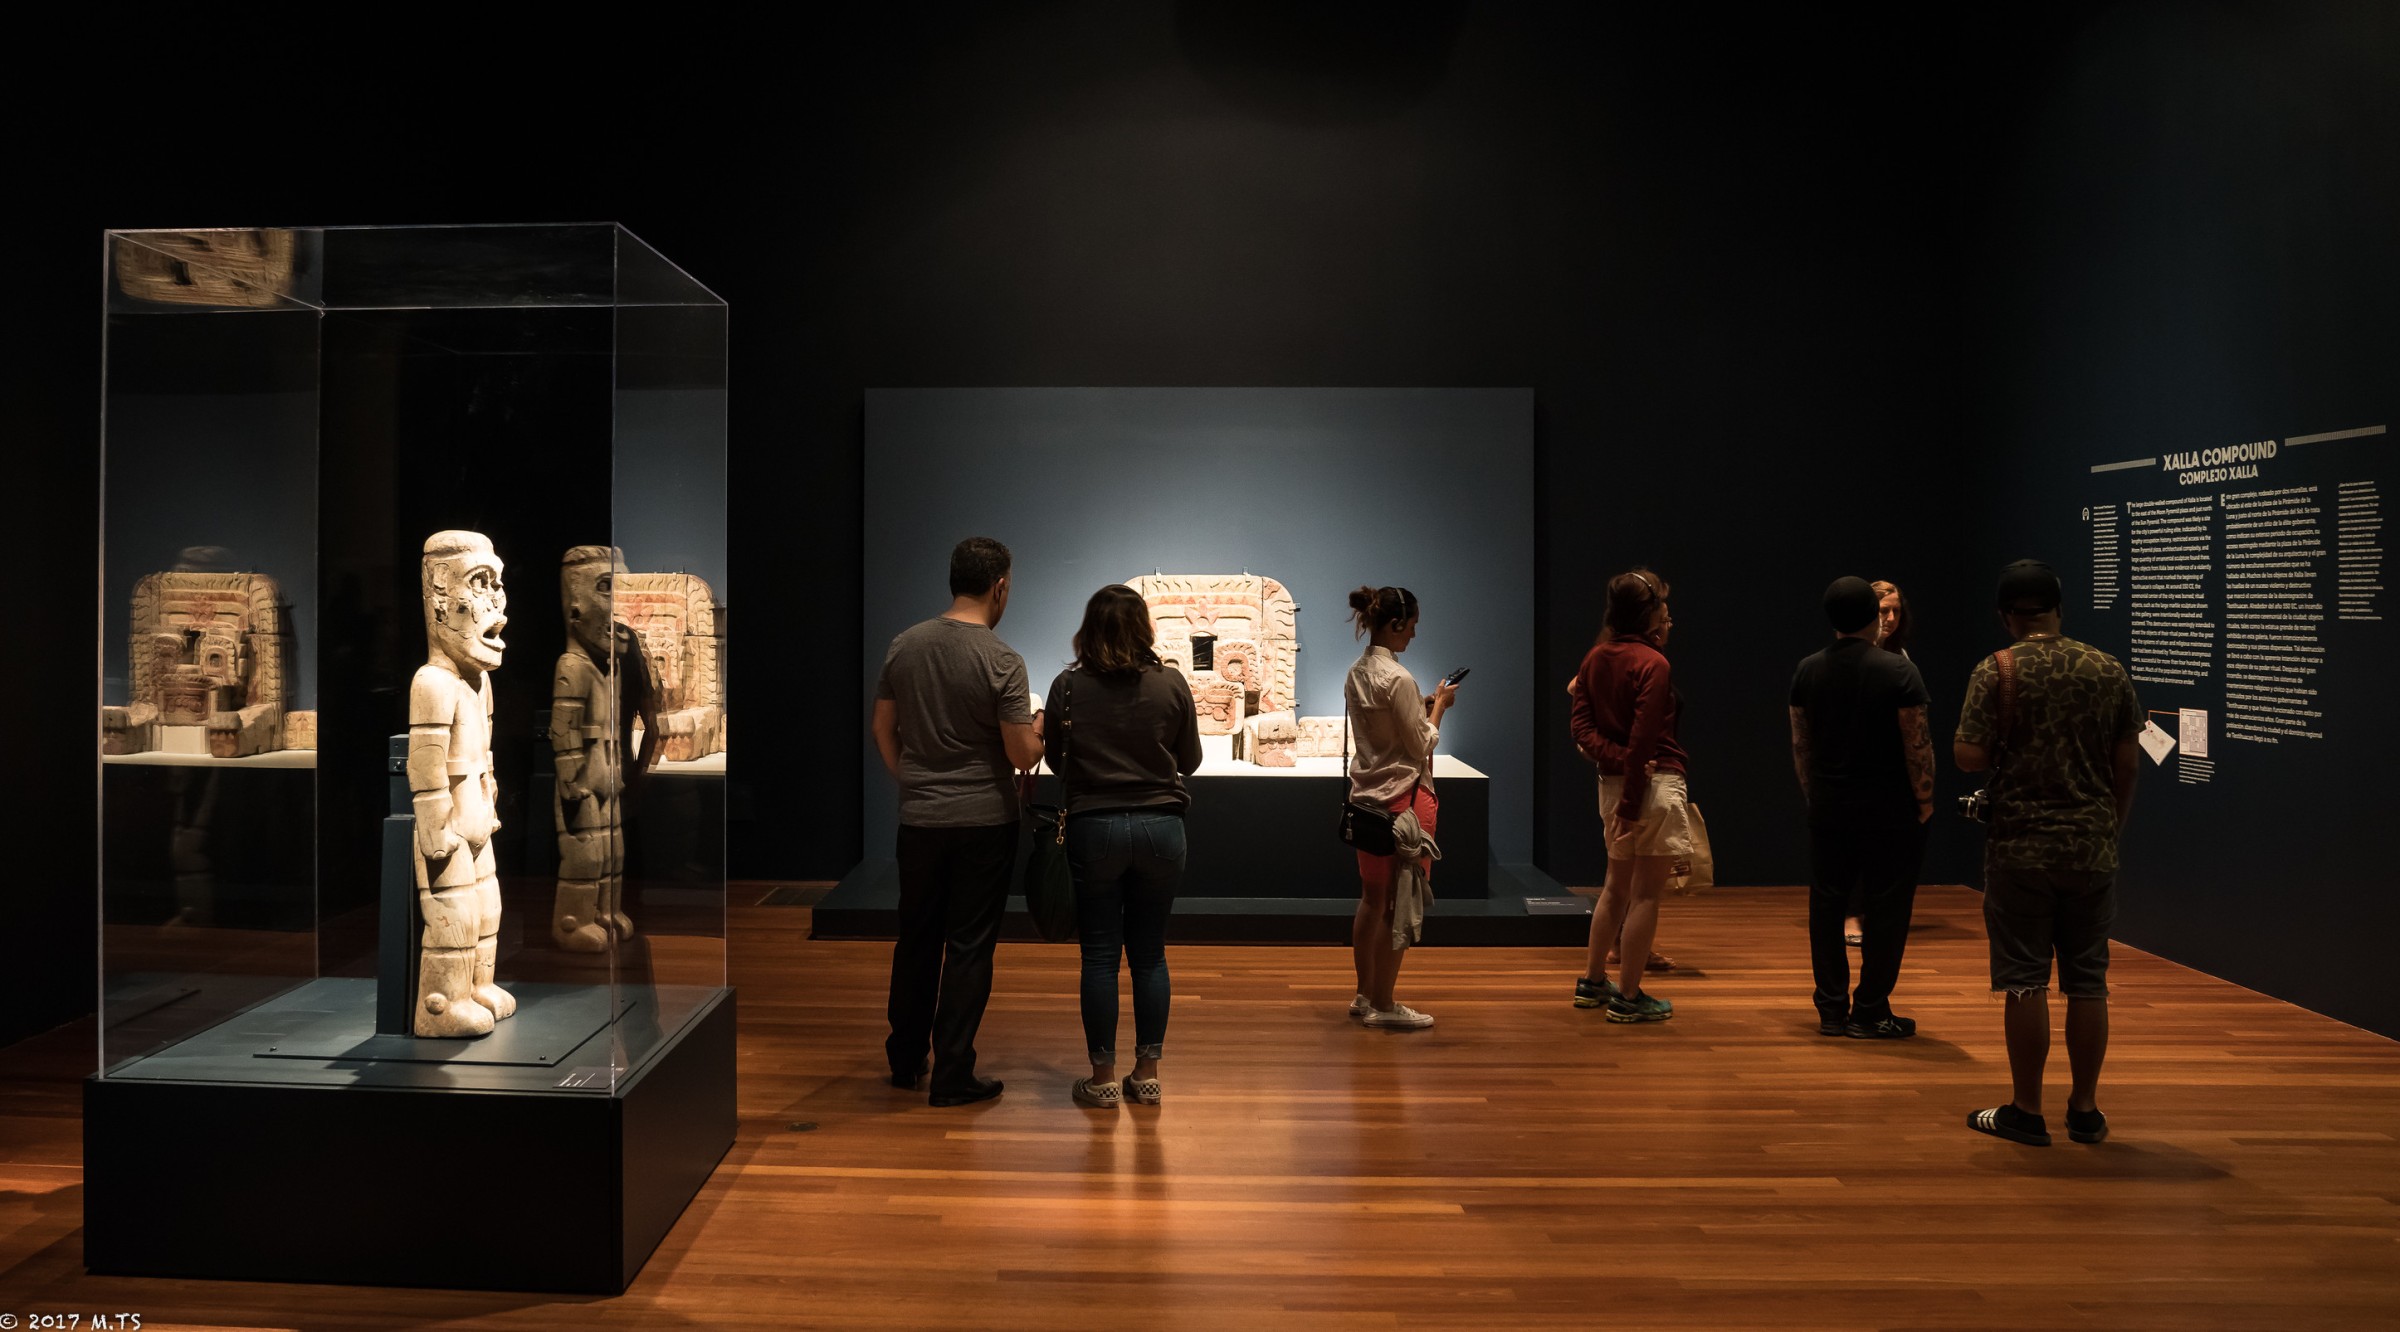 Teotihuacan Exhibition at De Young Museum, Oct. 2017